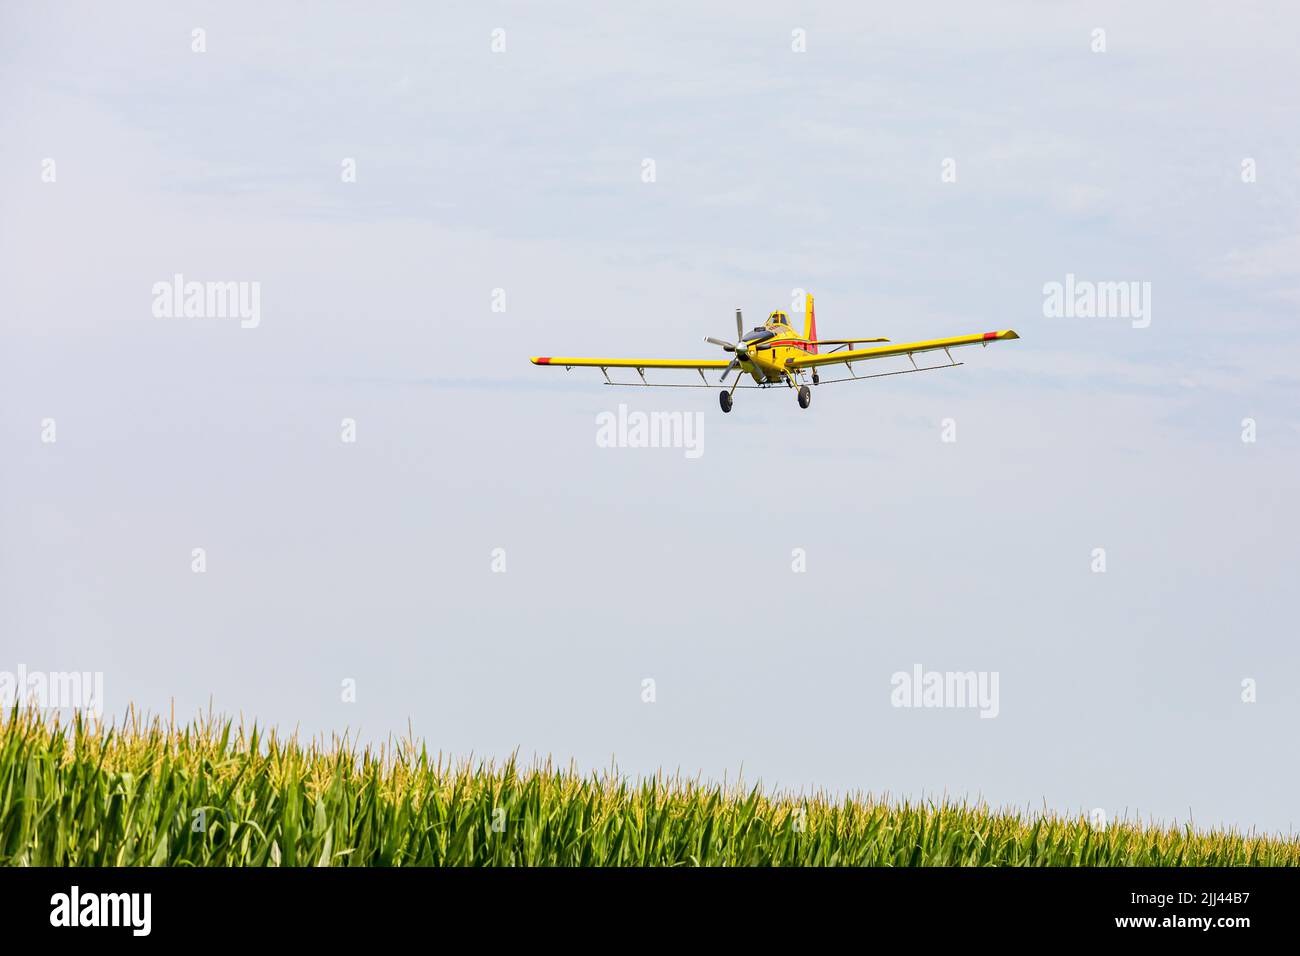 Crop duster airplane spraying chemicals on cornfield. Fungicide, pesticide and crop spraying concept. Stock Photo